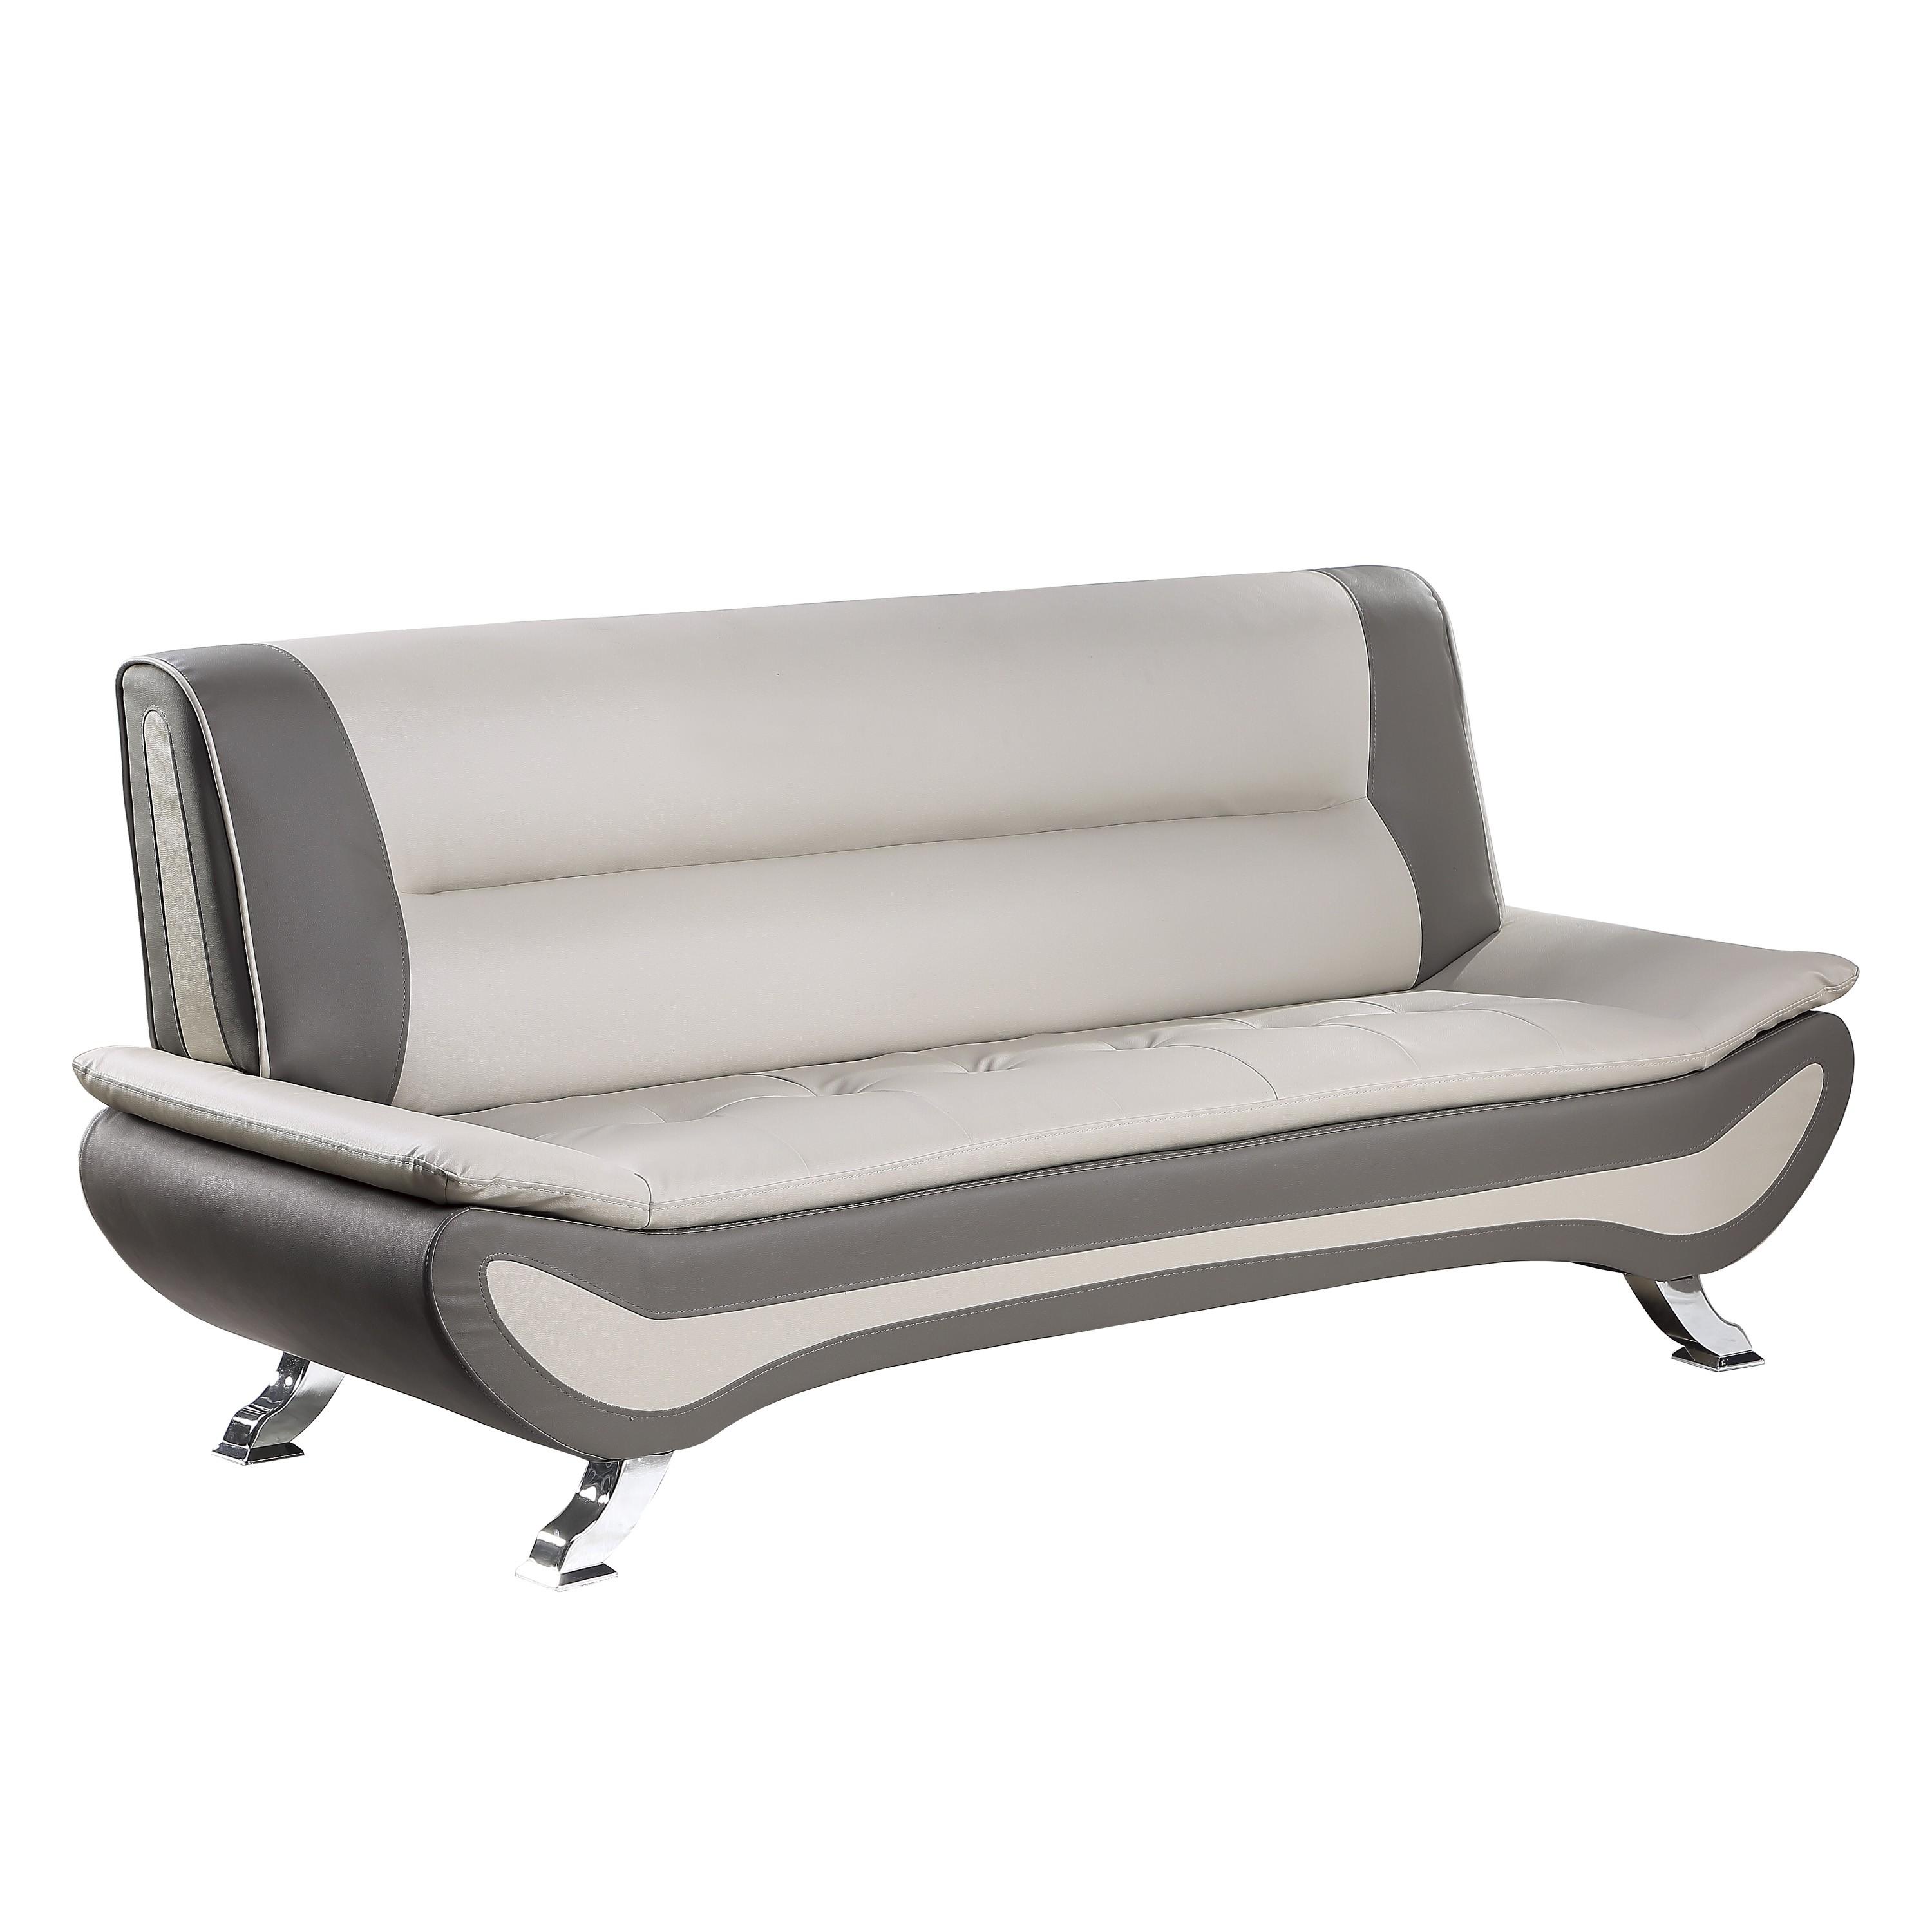 Contemporary Sofa 8219BEG-3 Veloce 8219BEG-3 in Gray, Beige Faux Leather